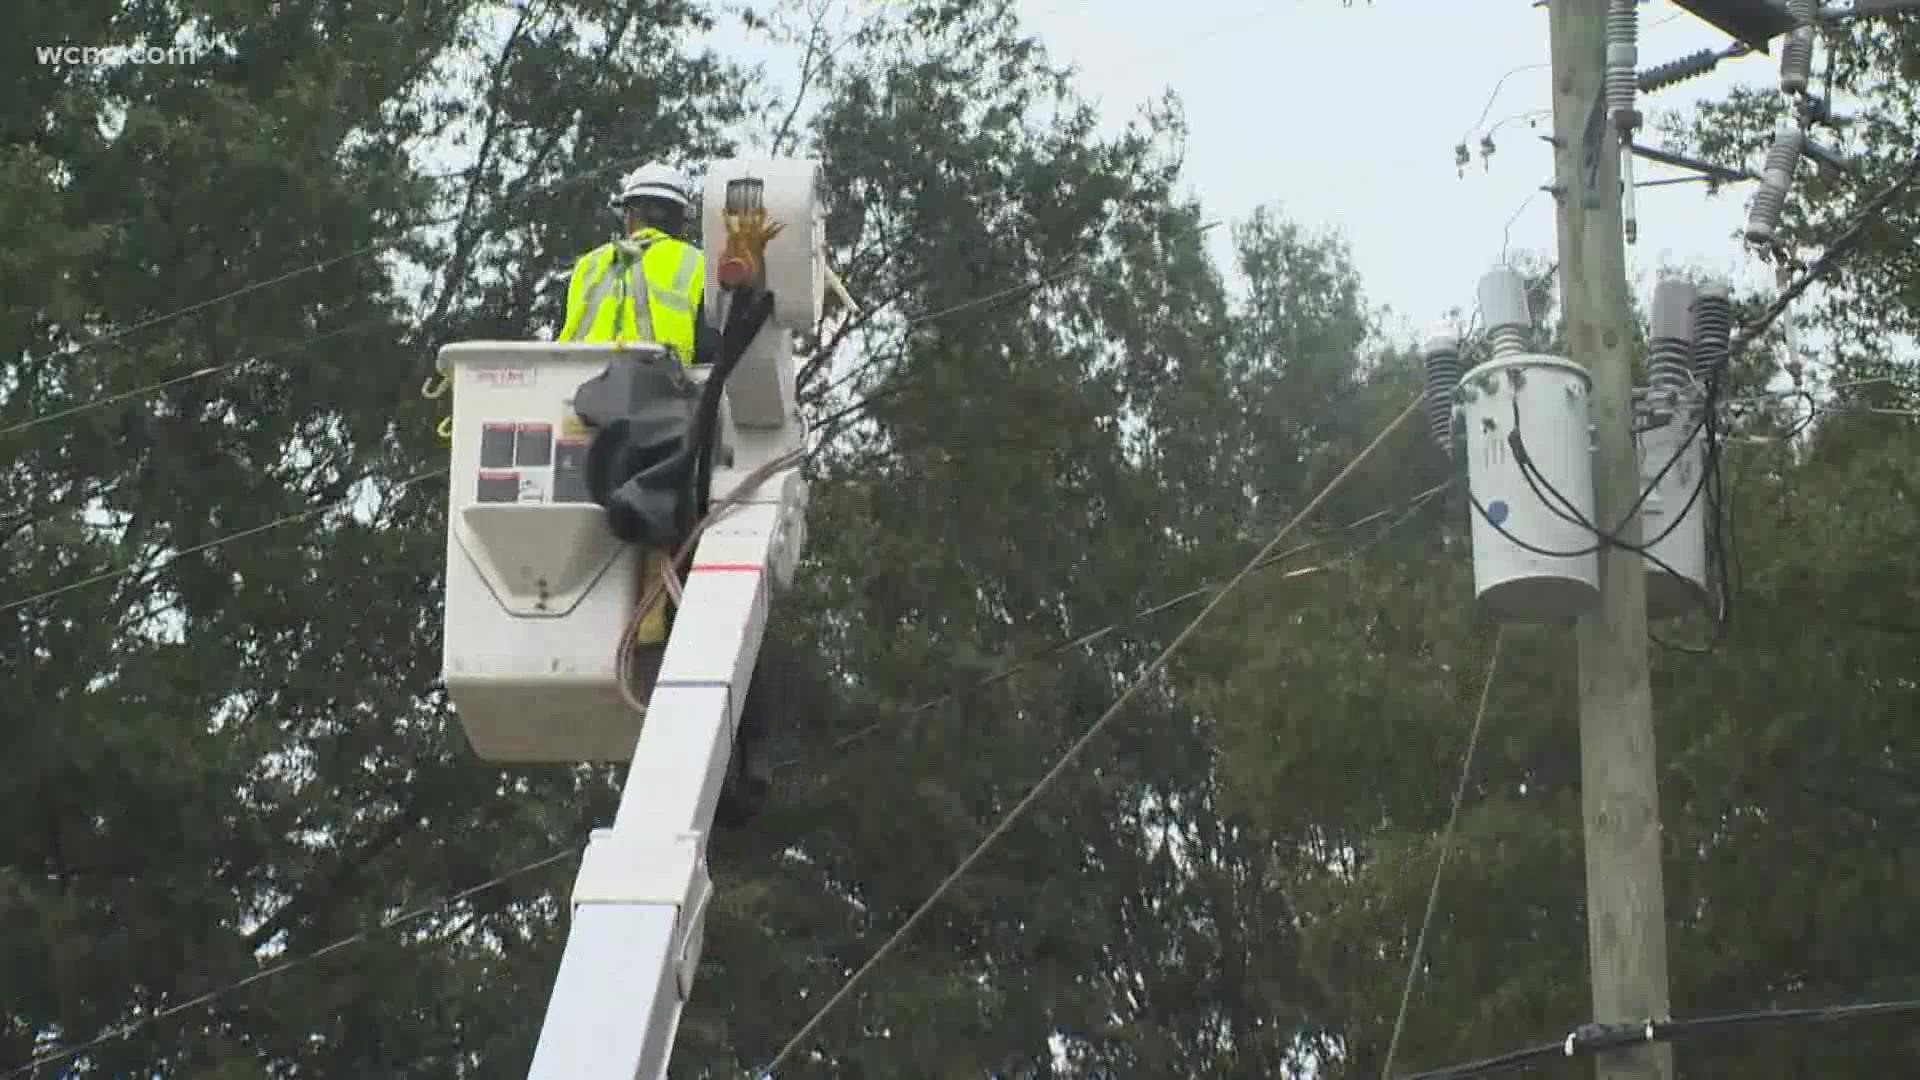 Duke Energy crews have been working long hours to get the lights back on for families all over the Carolinas.